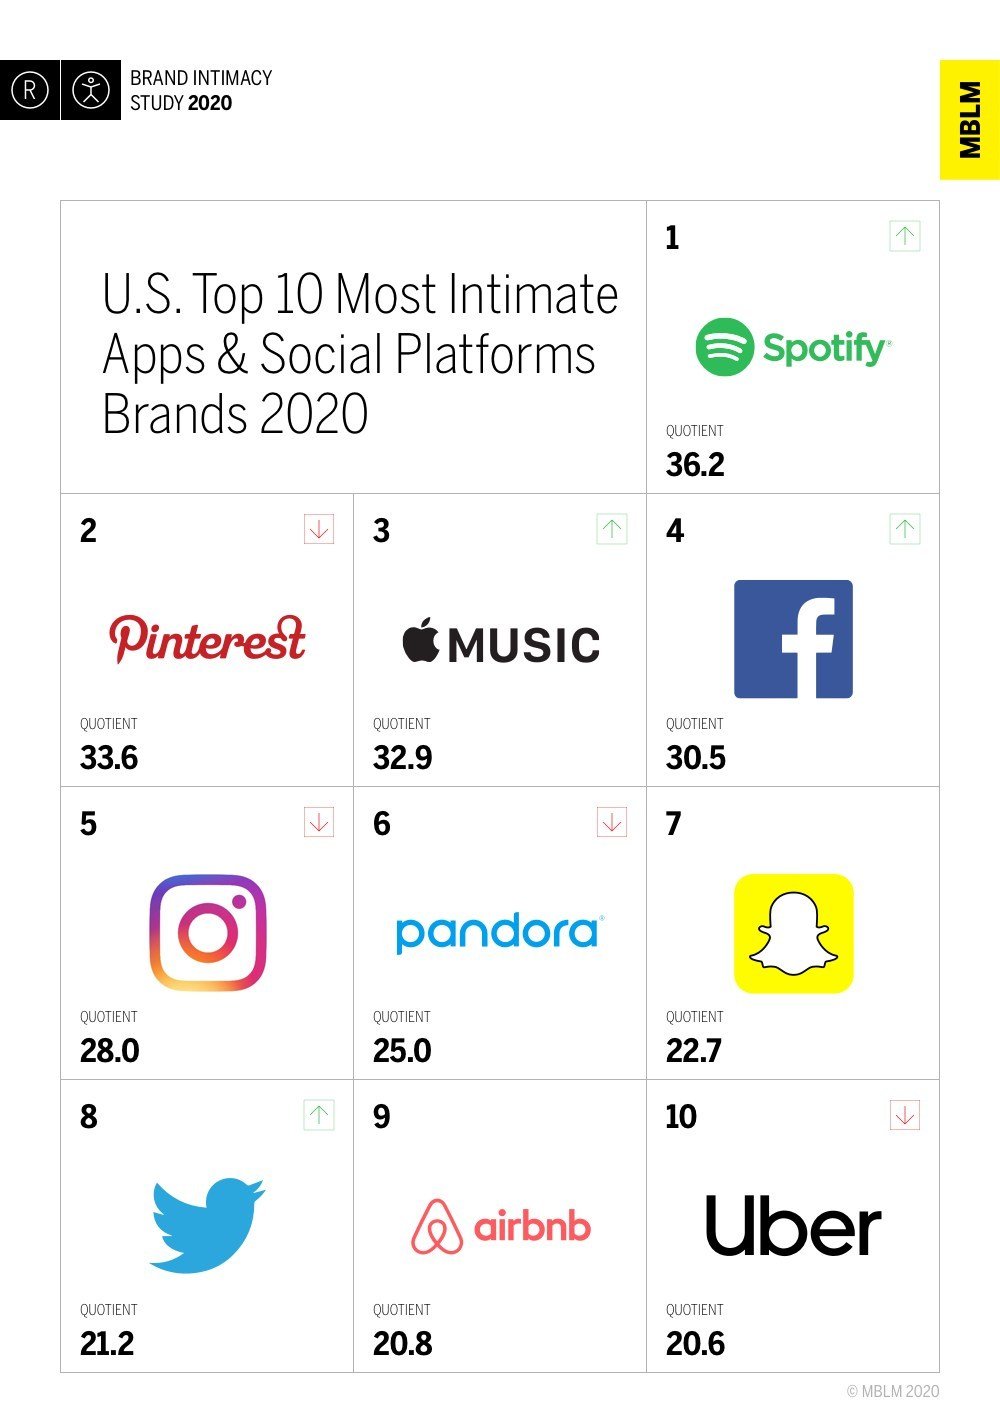 U.S. Top 10 Most Intimate Apps & Social Platforms Brands, According to MBLM's Brand Intimacy 2020 Study